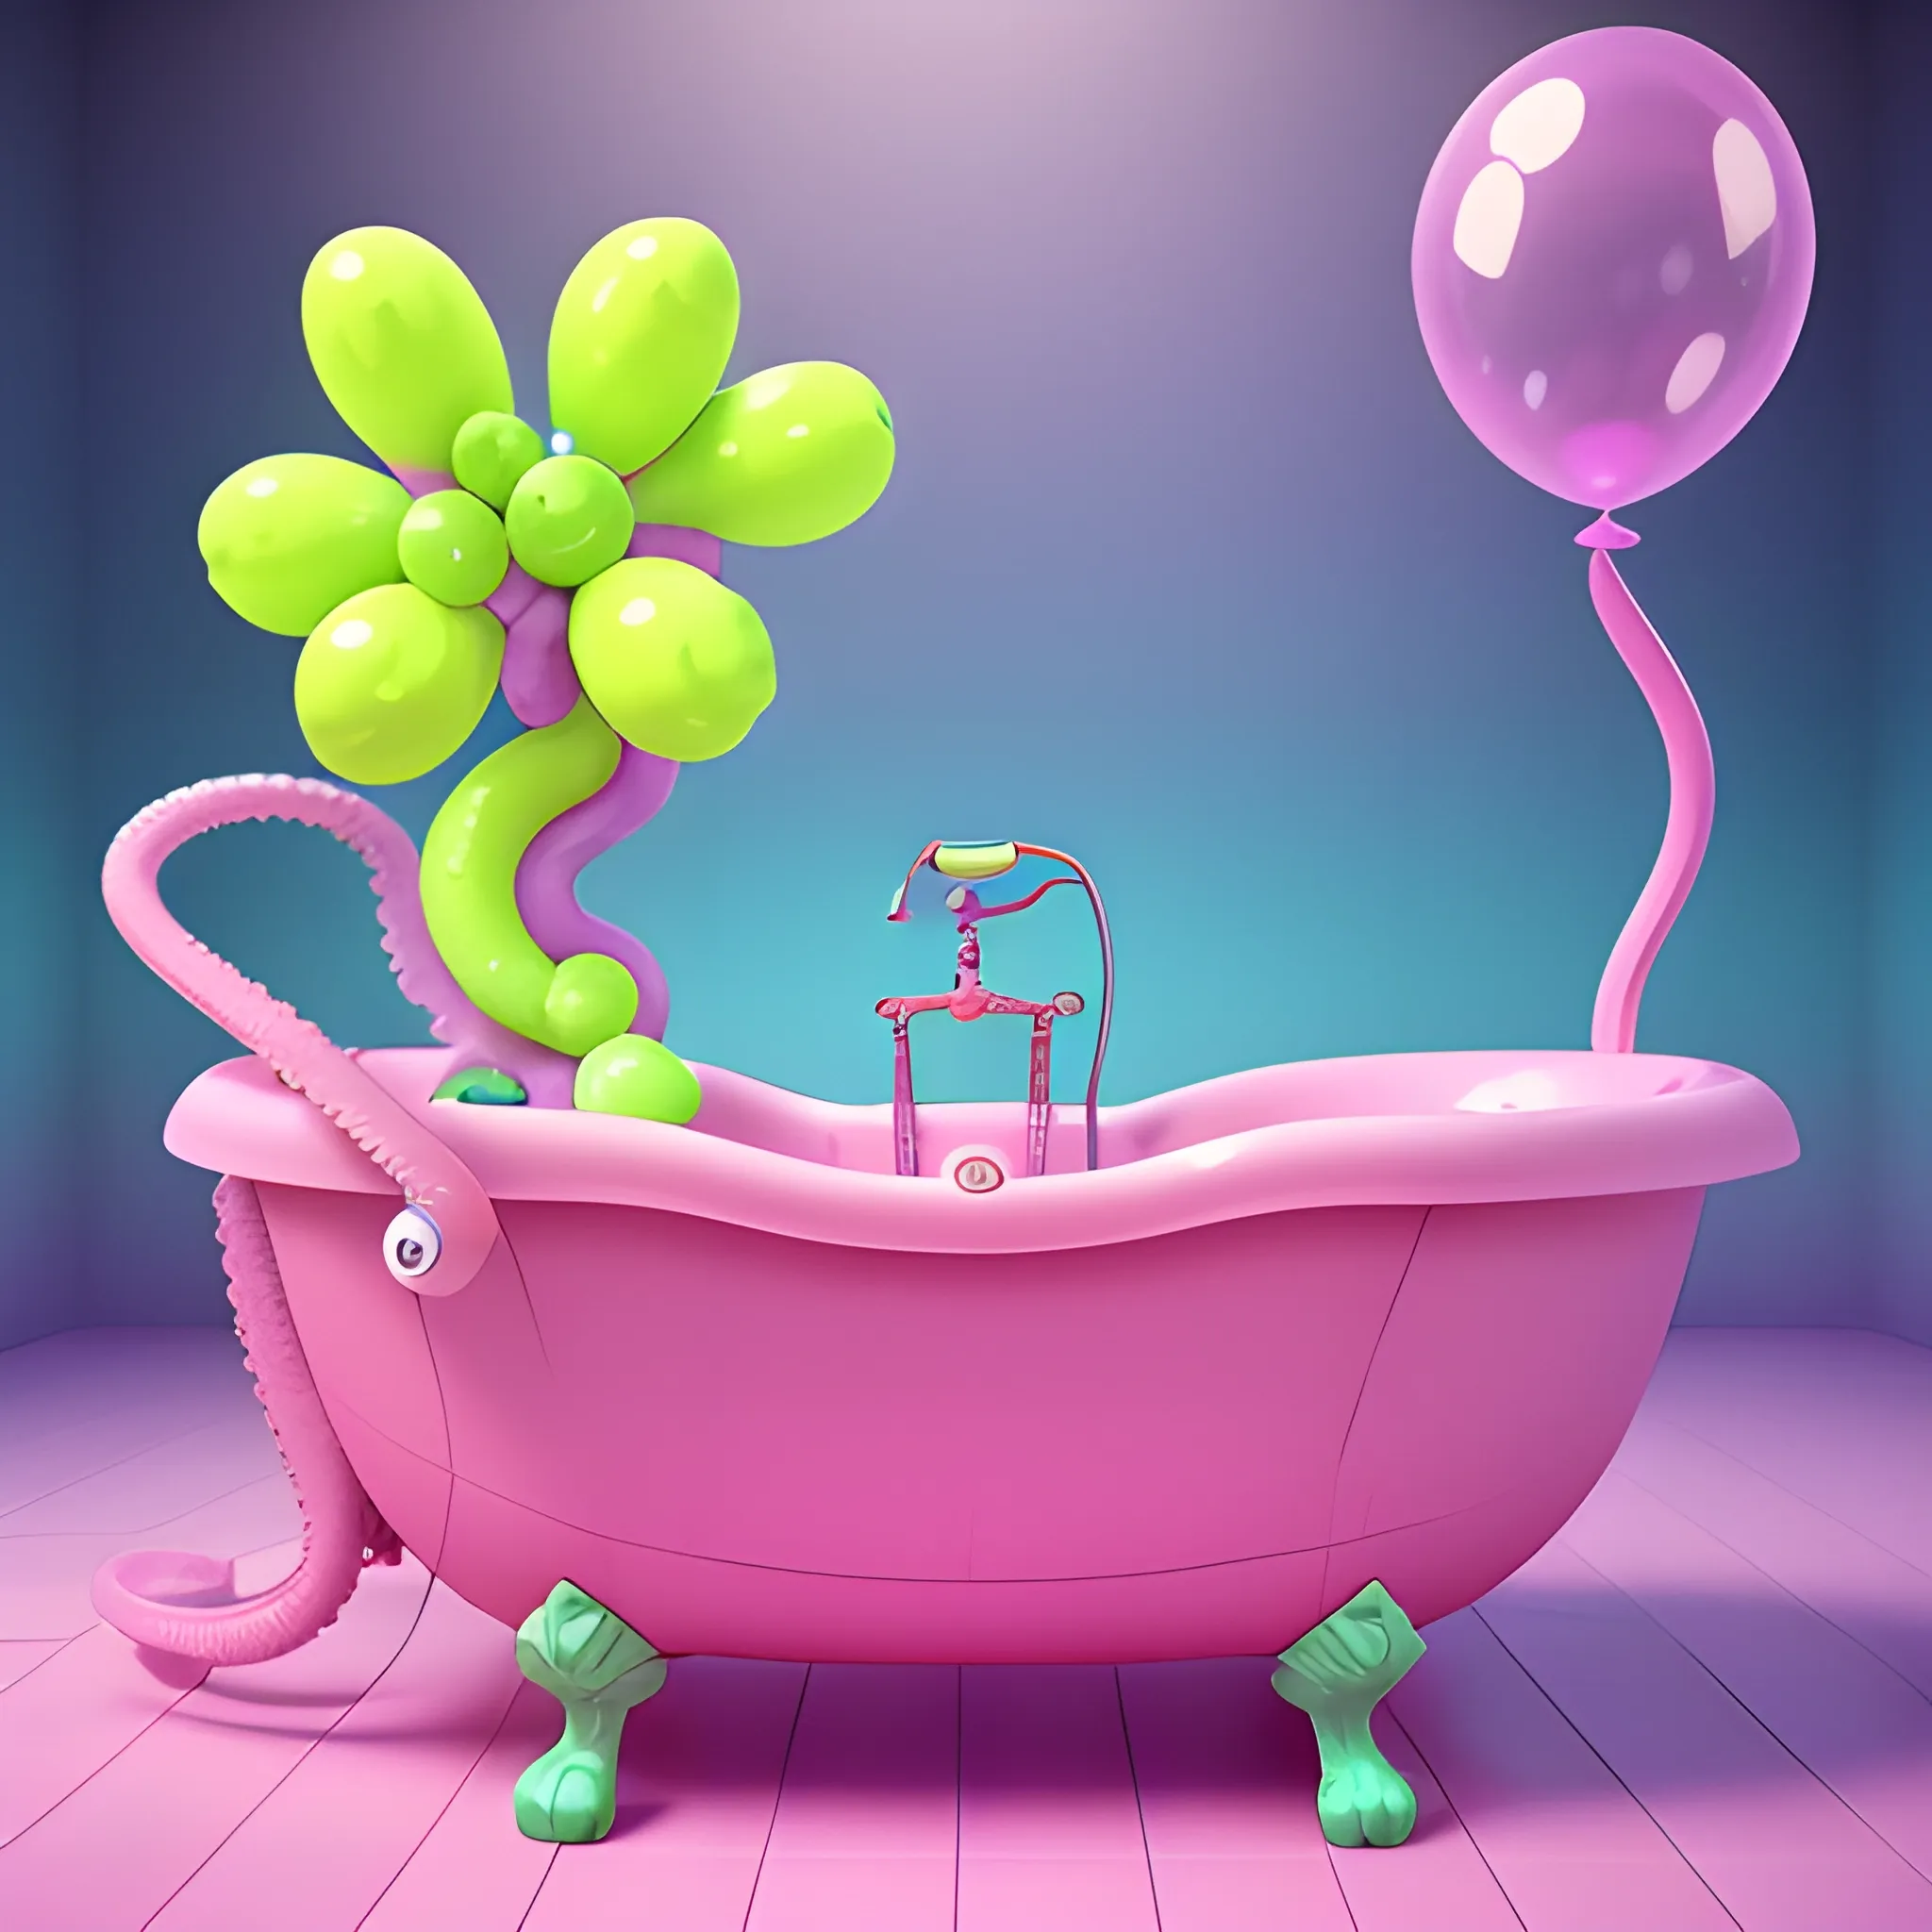 A banana looks like an octopus is relaxing into a bathtub, pink purple light blue and green bubbles, colorful balloons in the air, whimsical details, saturated colors, 3d Zbrush, CGI unreal engine, Cartoon,